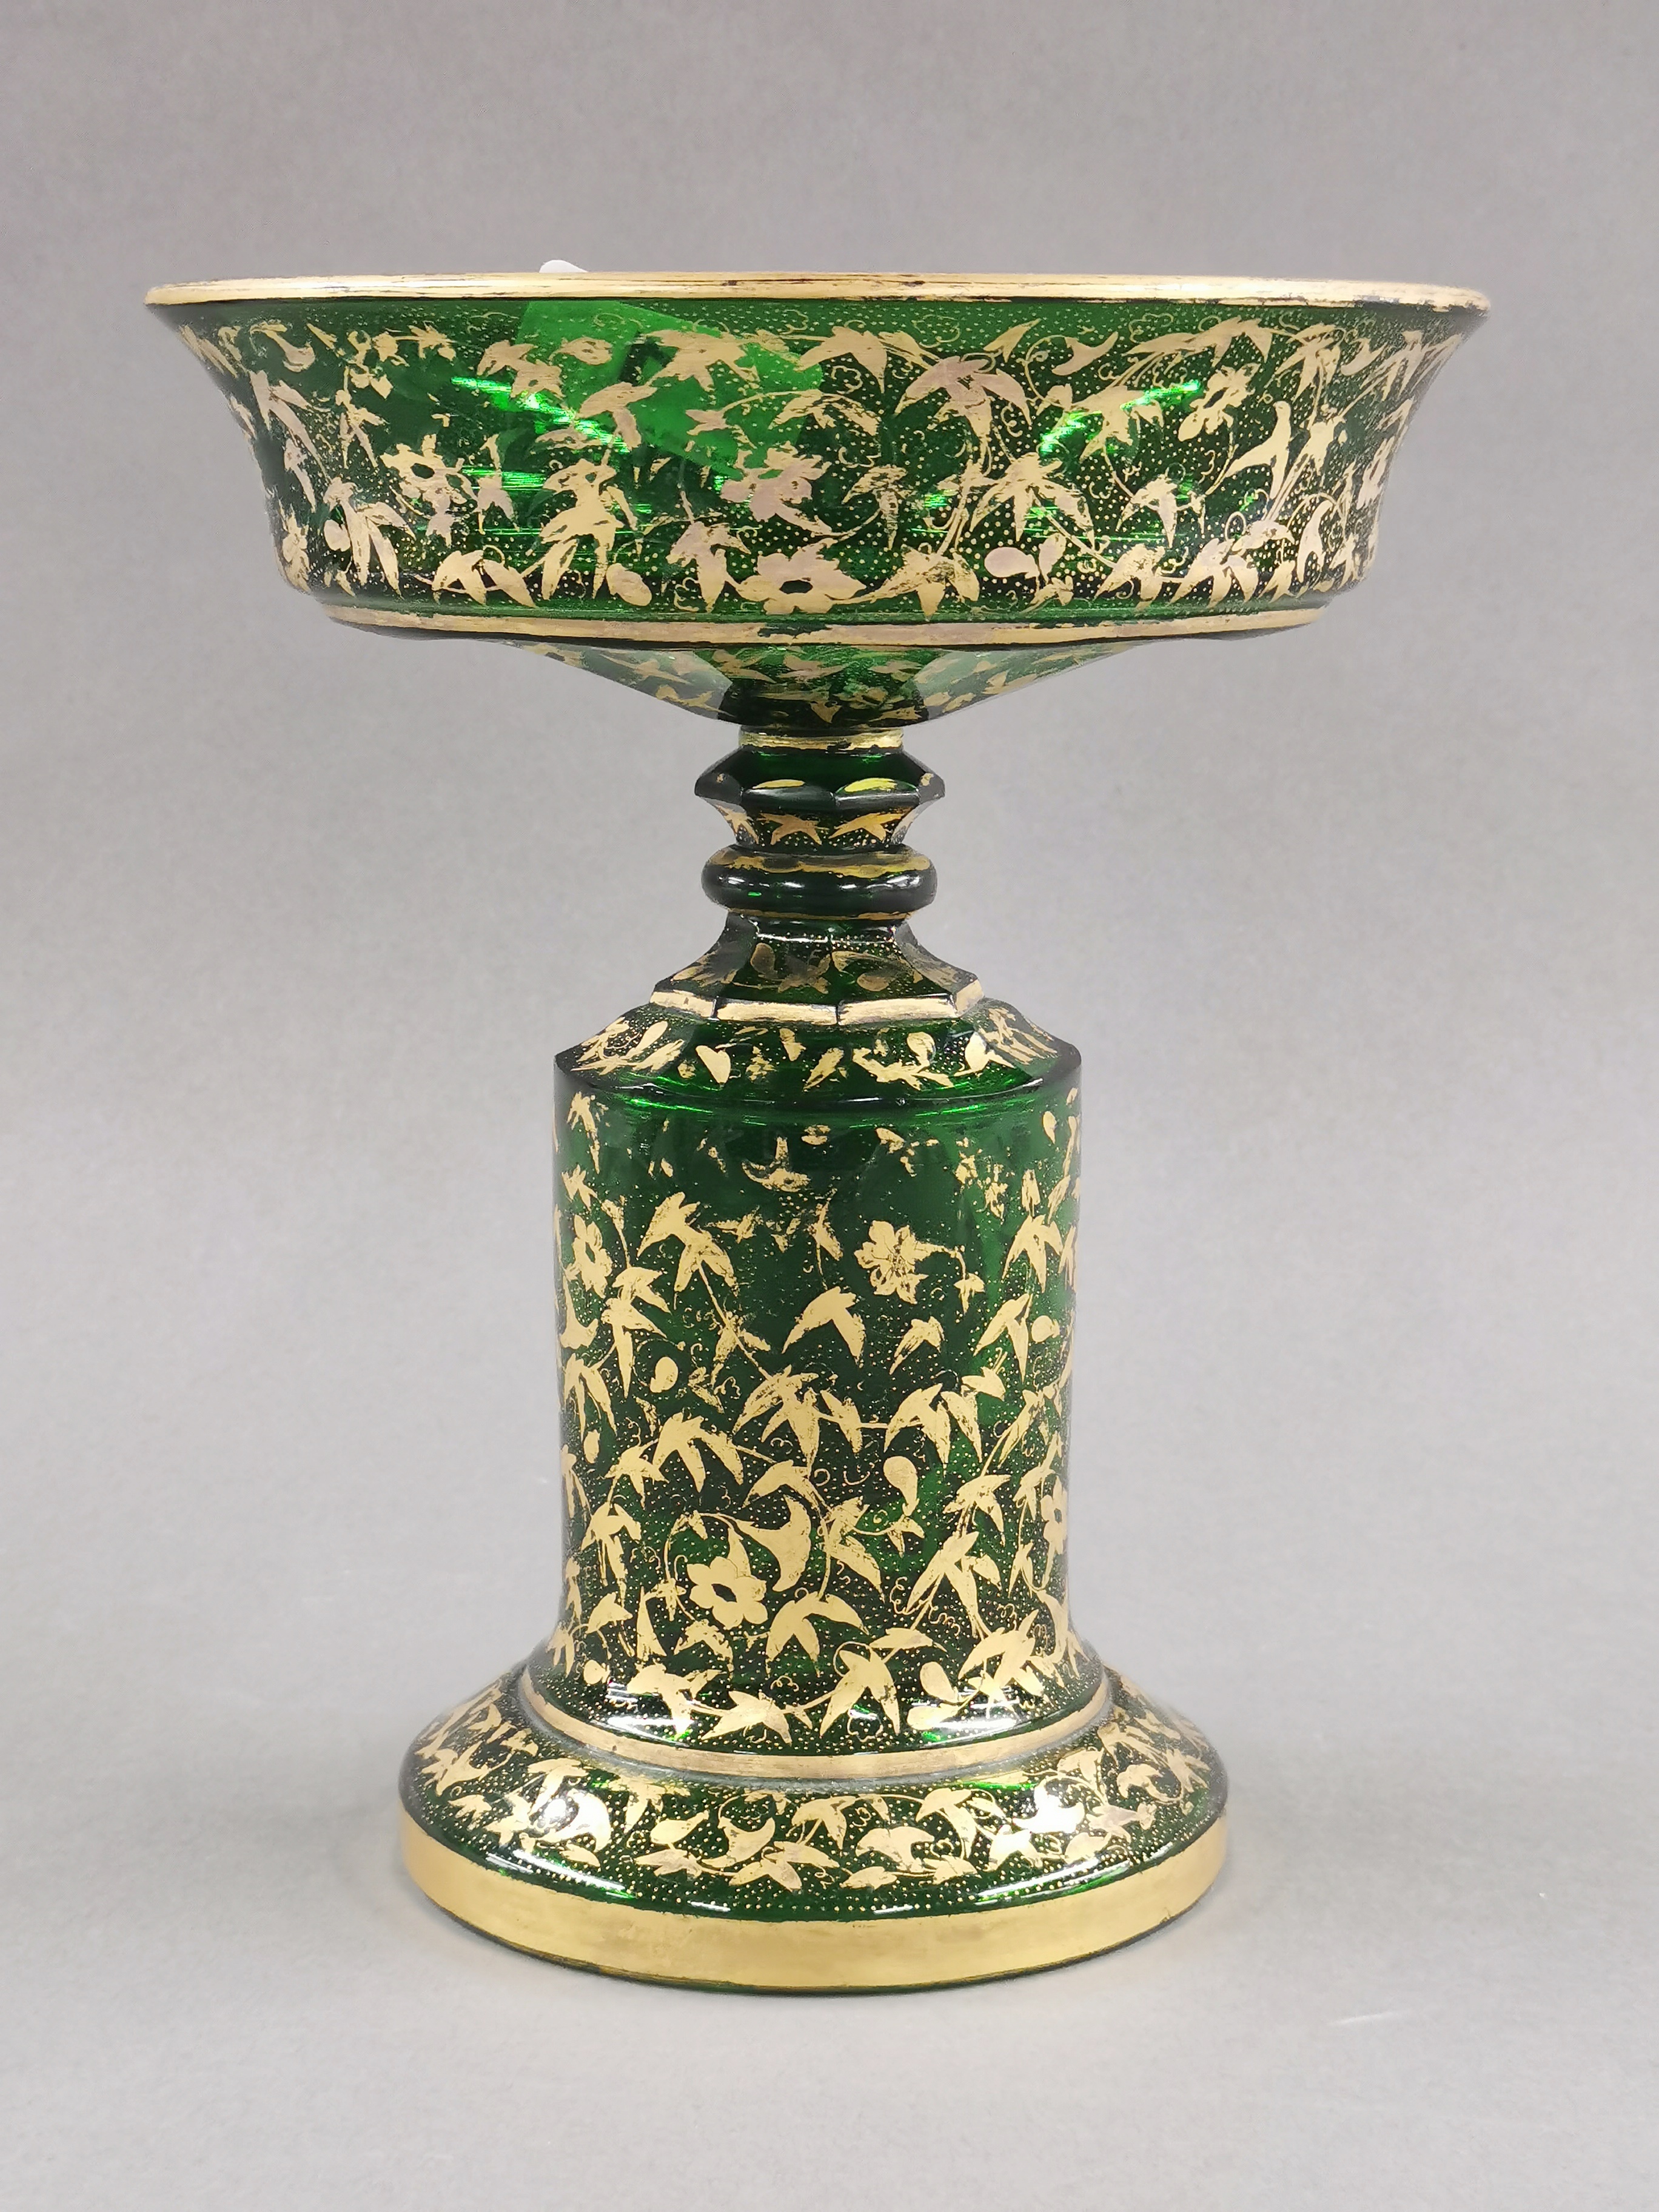 A fine 19th century hand painted and gilded green glass centrepiece, H. 24cm. - Image 3 of 4